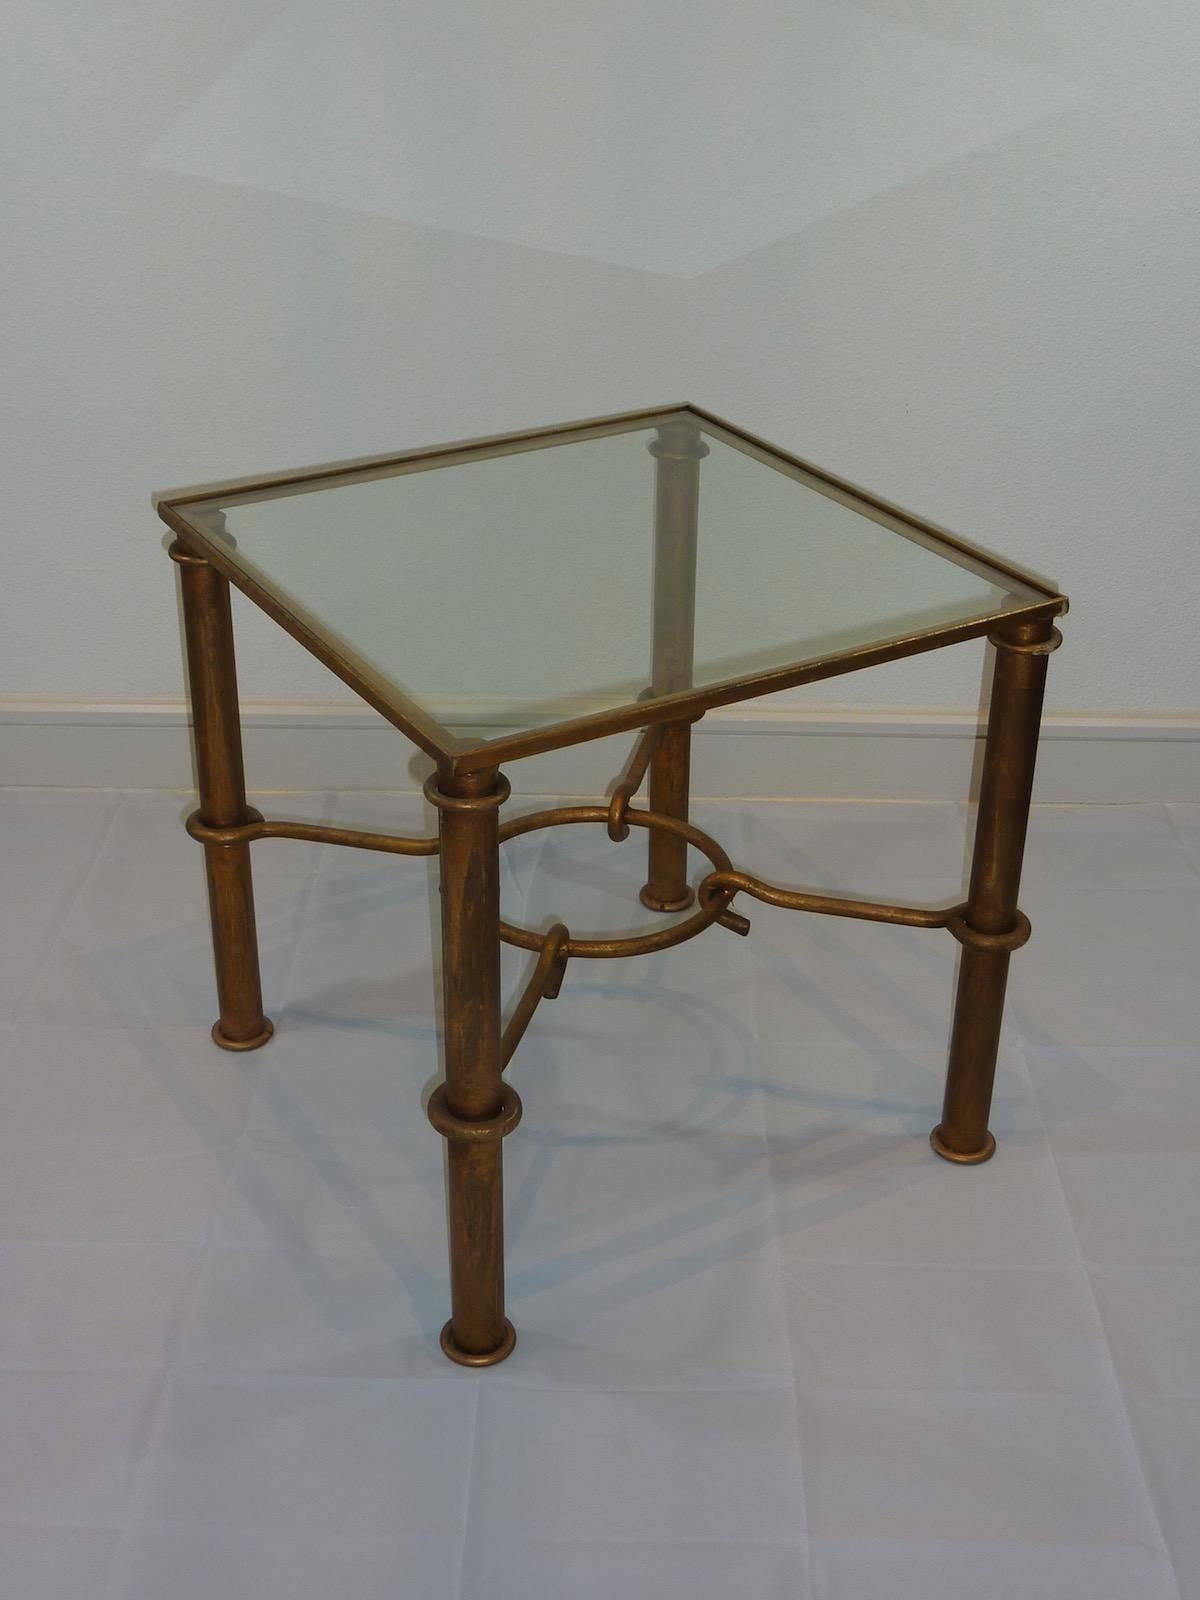 Vintage metal faux bamboo end table. Very good vintage condition with minor signs of wear as expected with age and use, slight wear to the metal.